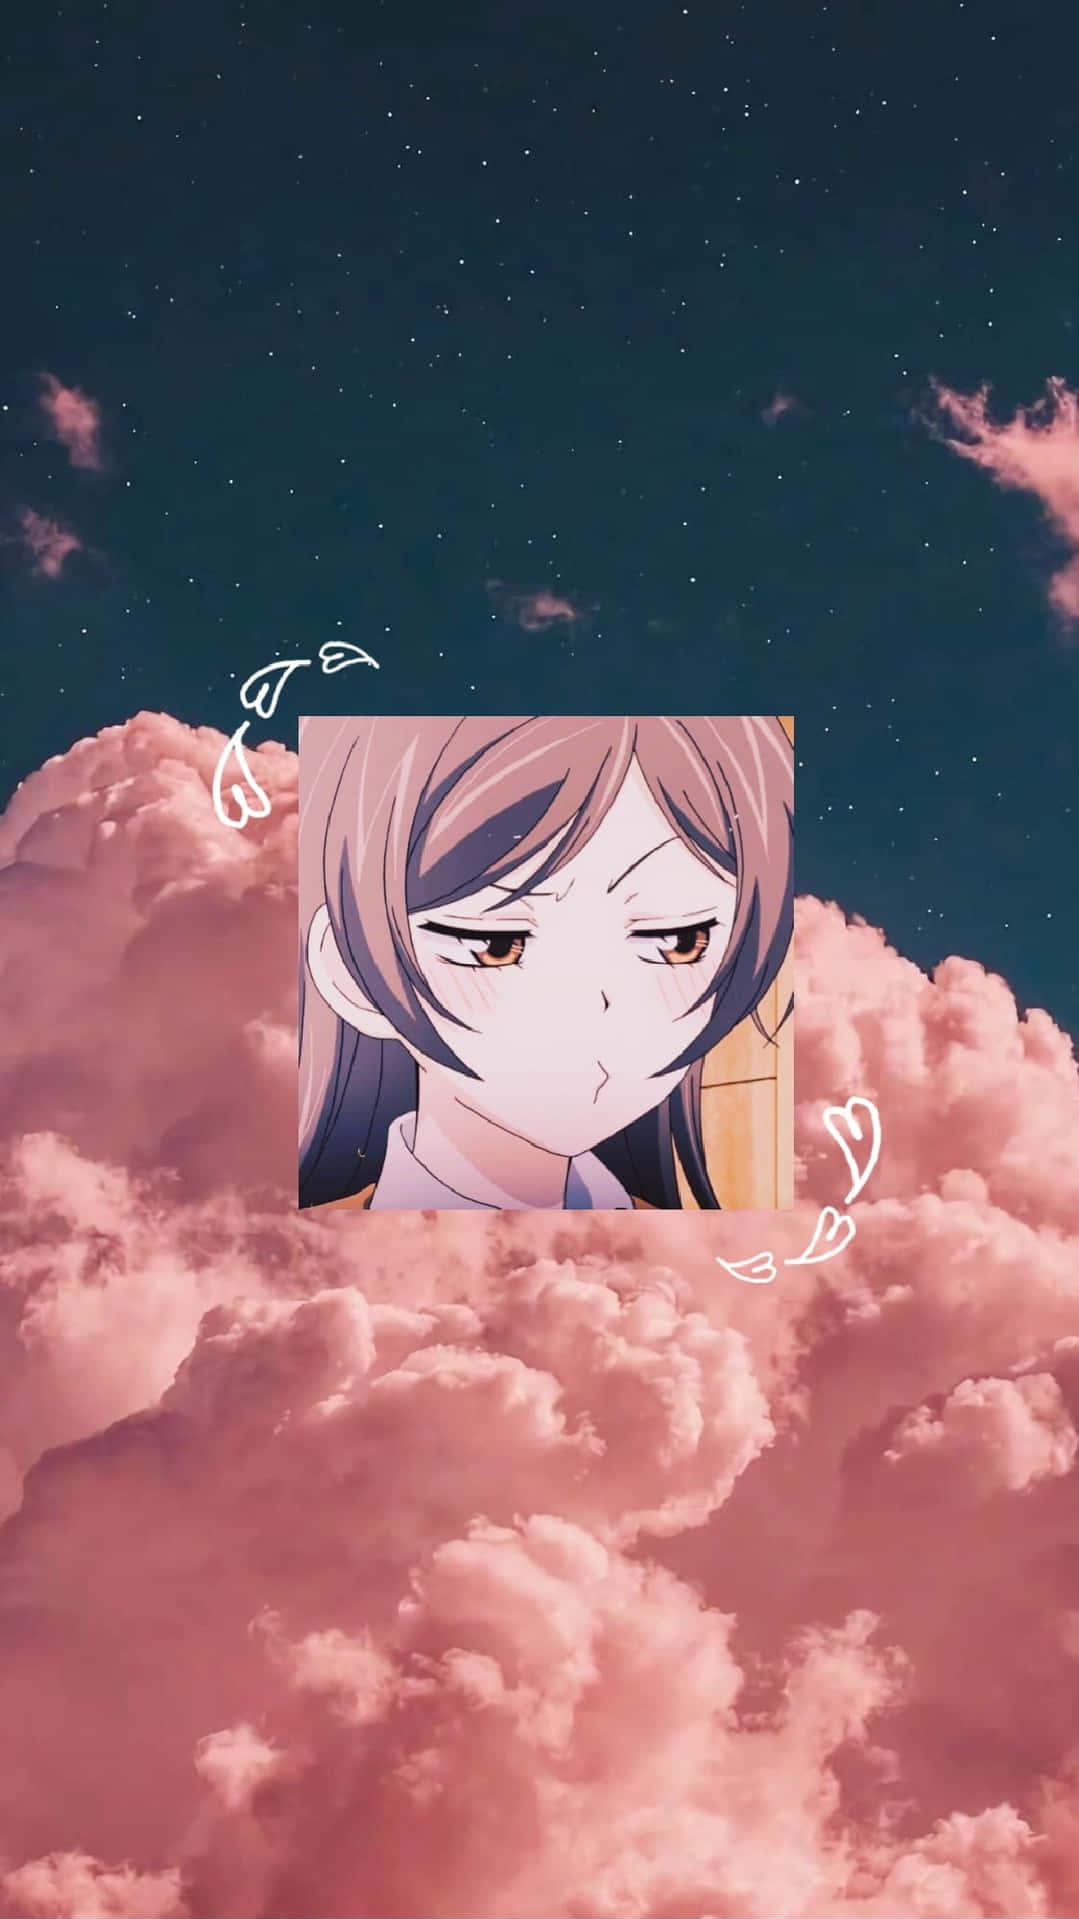 Cute Aesthetic Anime Wallpapers